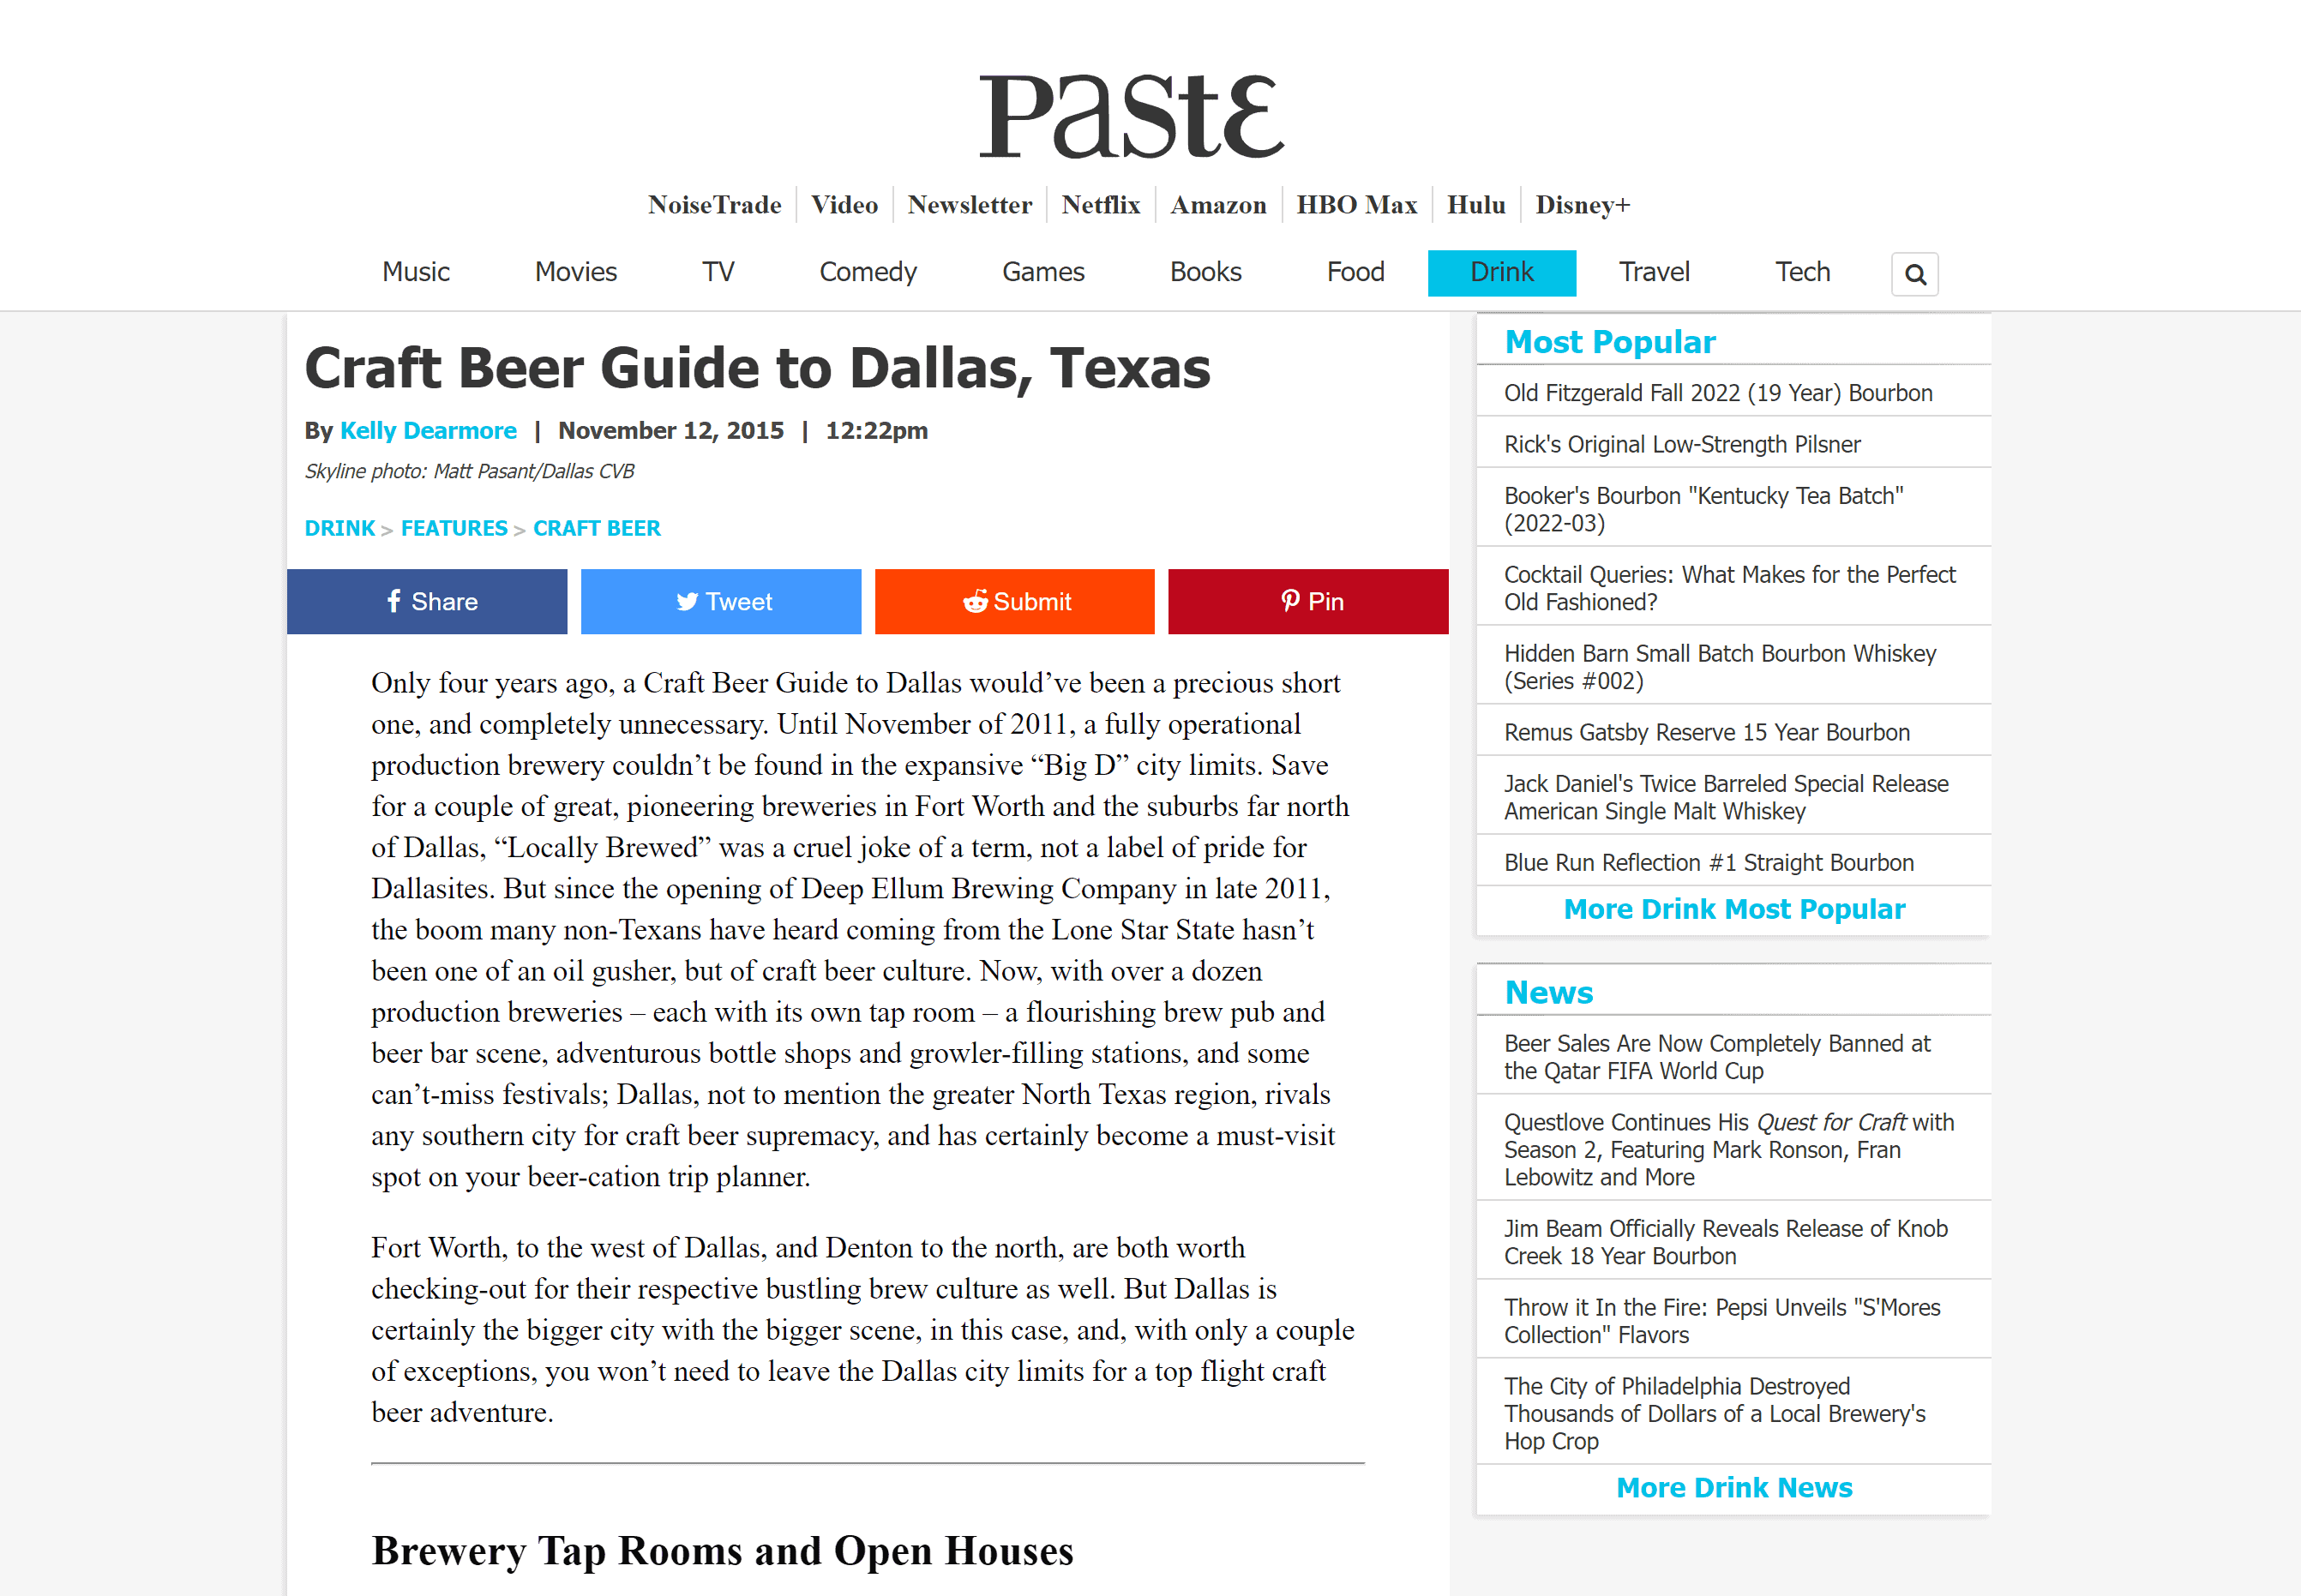 Craft Beer Guide to Dallas in Paste Magazine